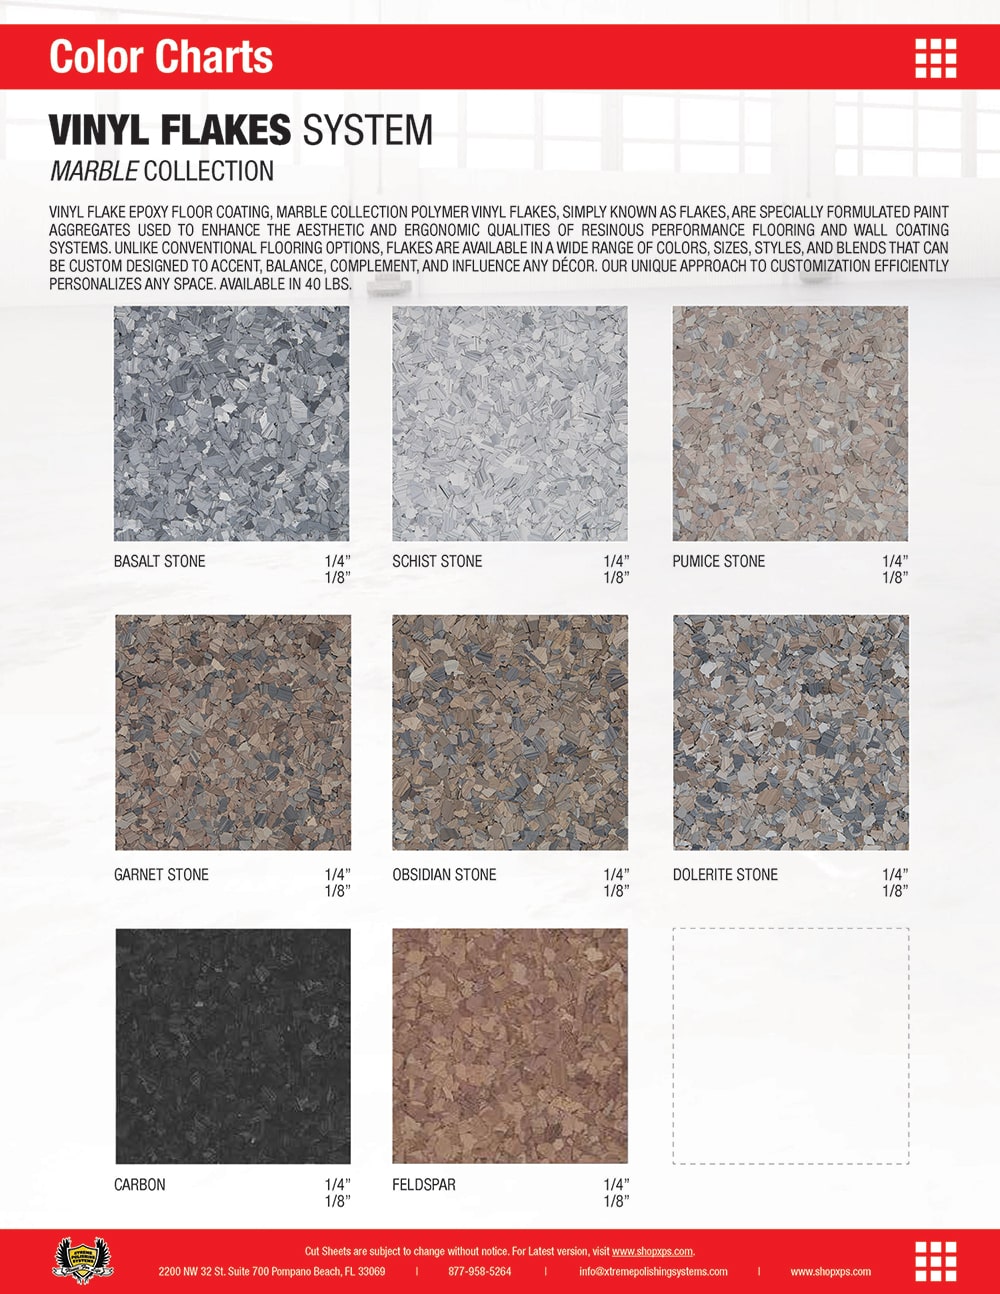 Marble Vinyl Flakes System Color Chart | XPS